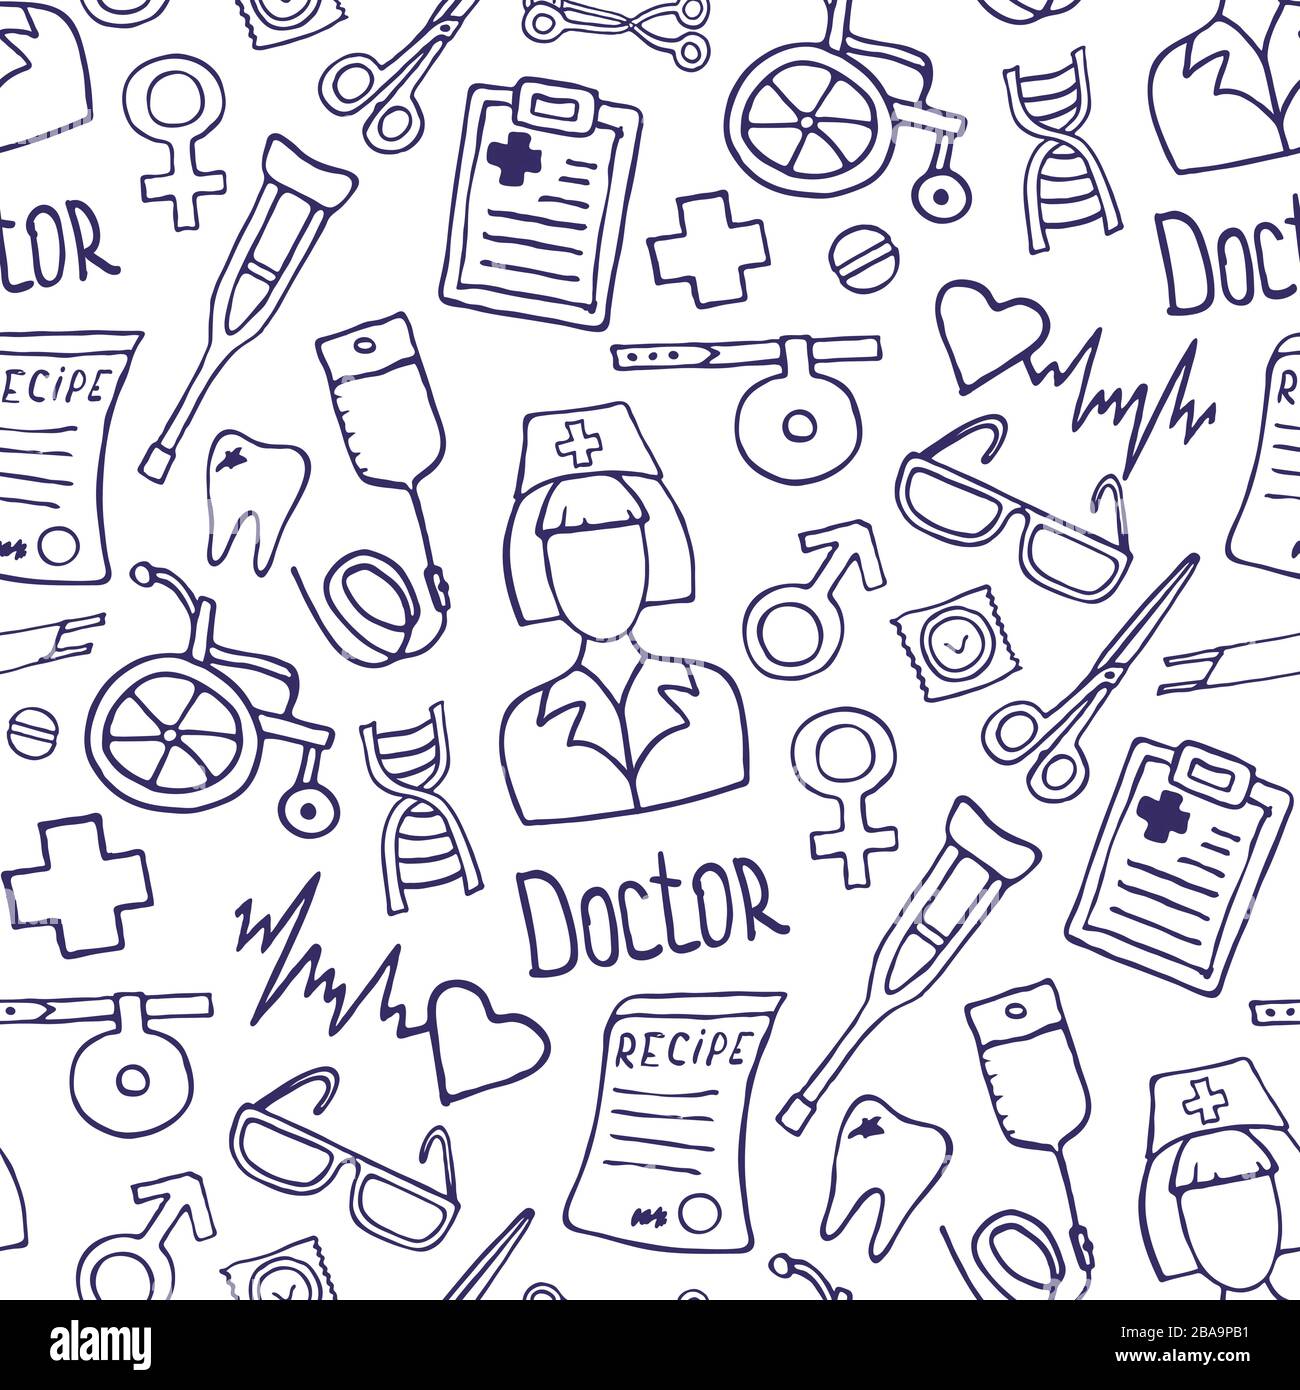 Doodle Cartoon Seamless Pattern Background For - Stock